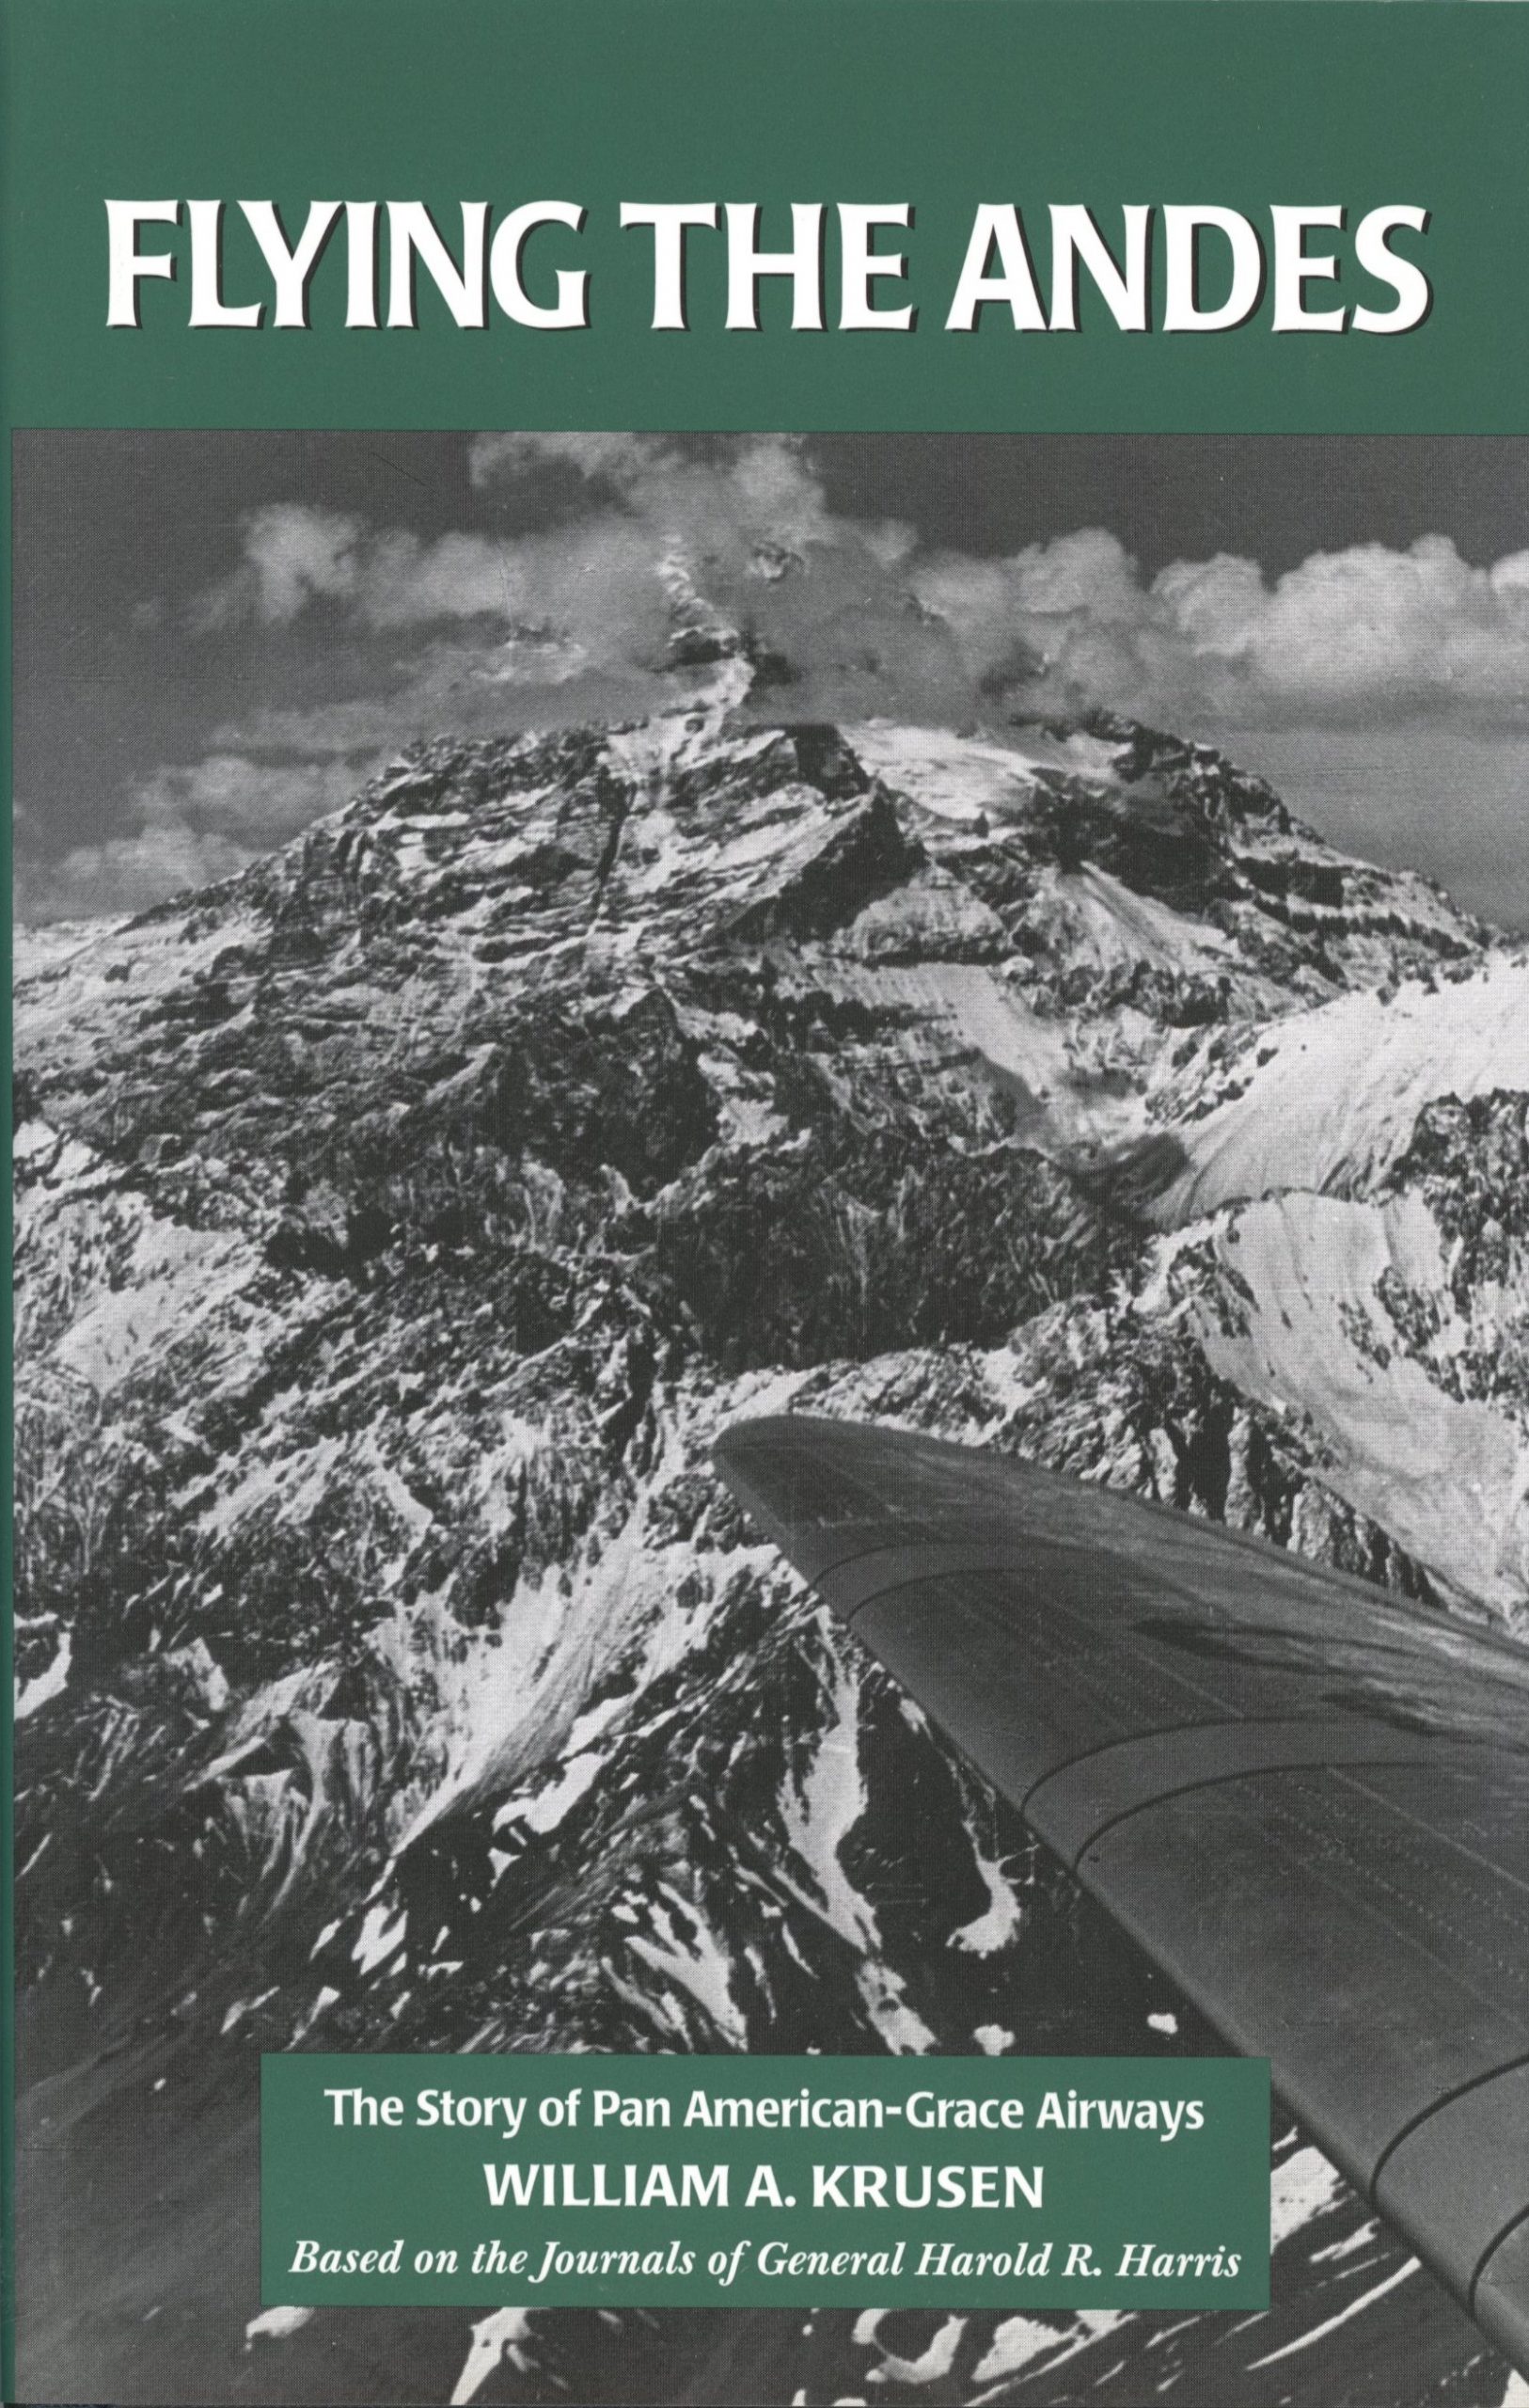 Image of the front Cover of Flying the Andes.